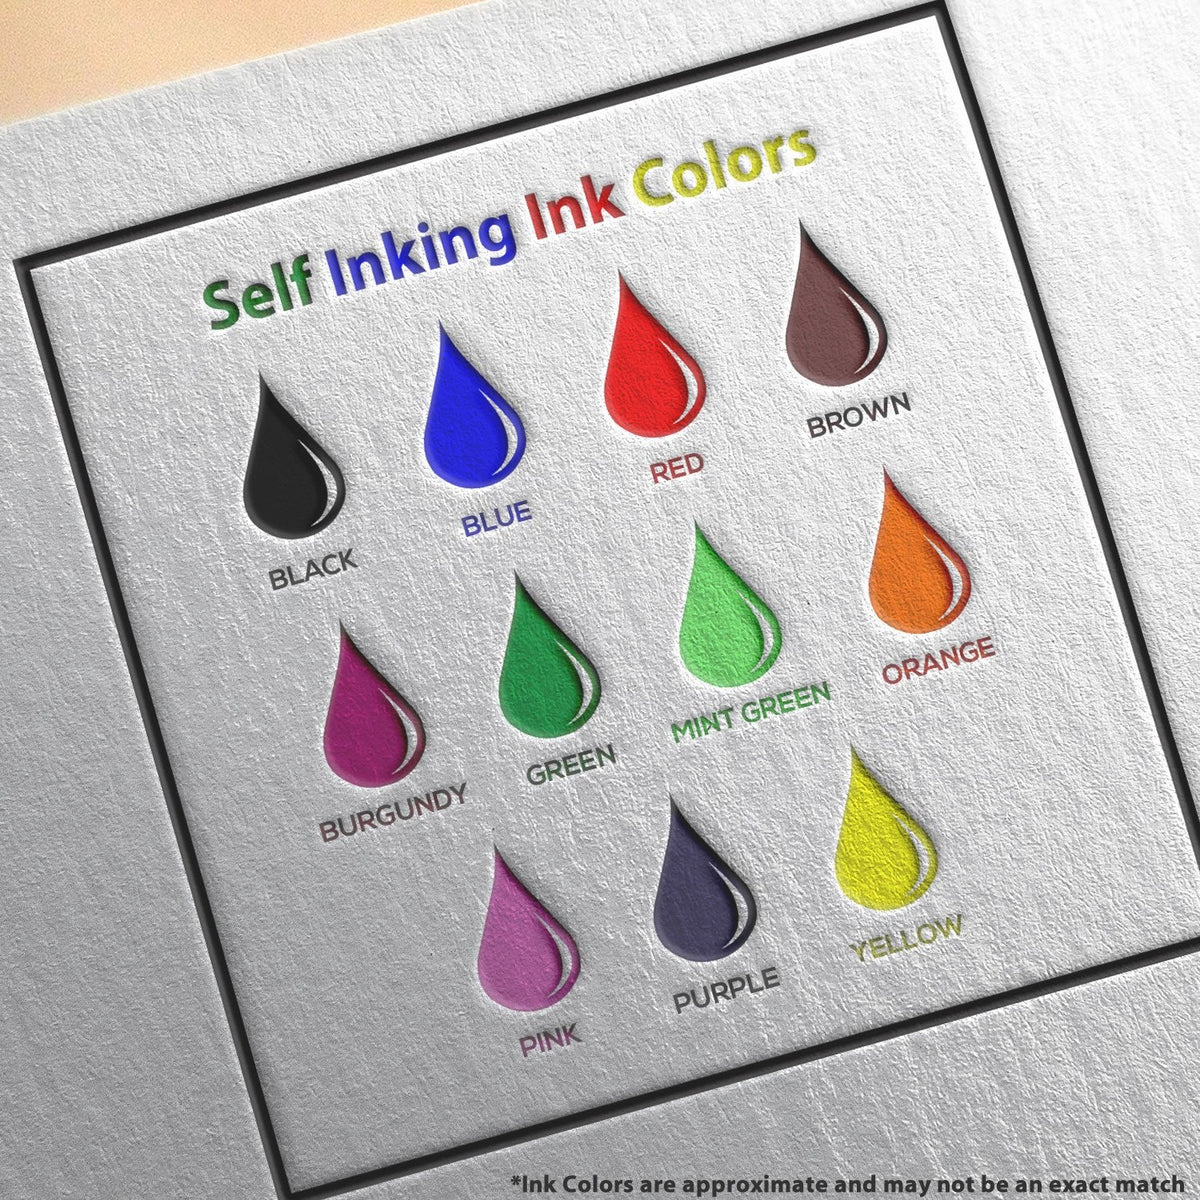 Self-Inking Received with Date Box Stamp Ink Color Options